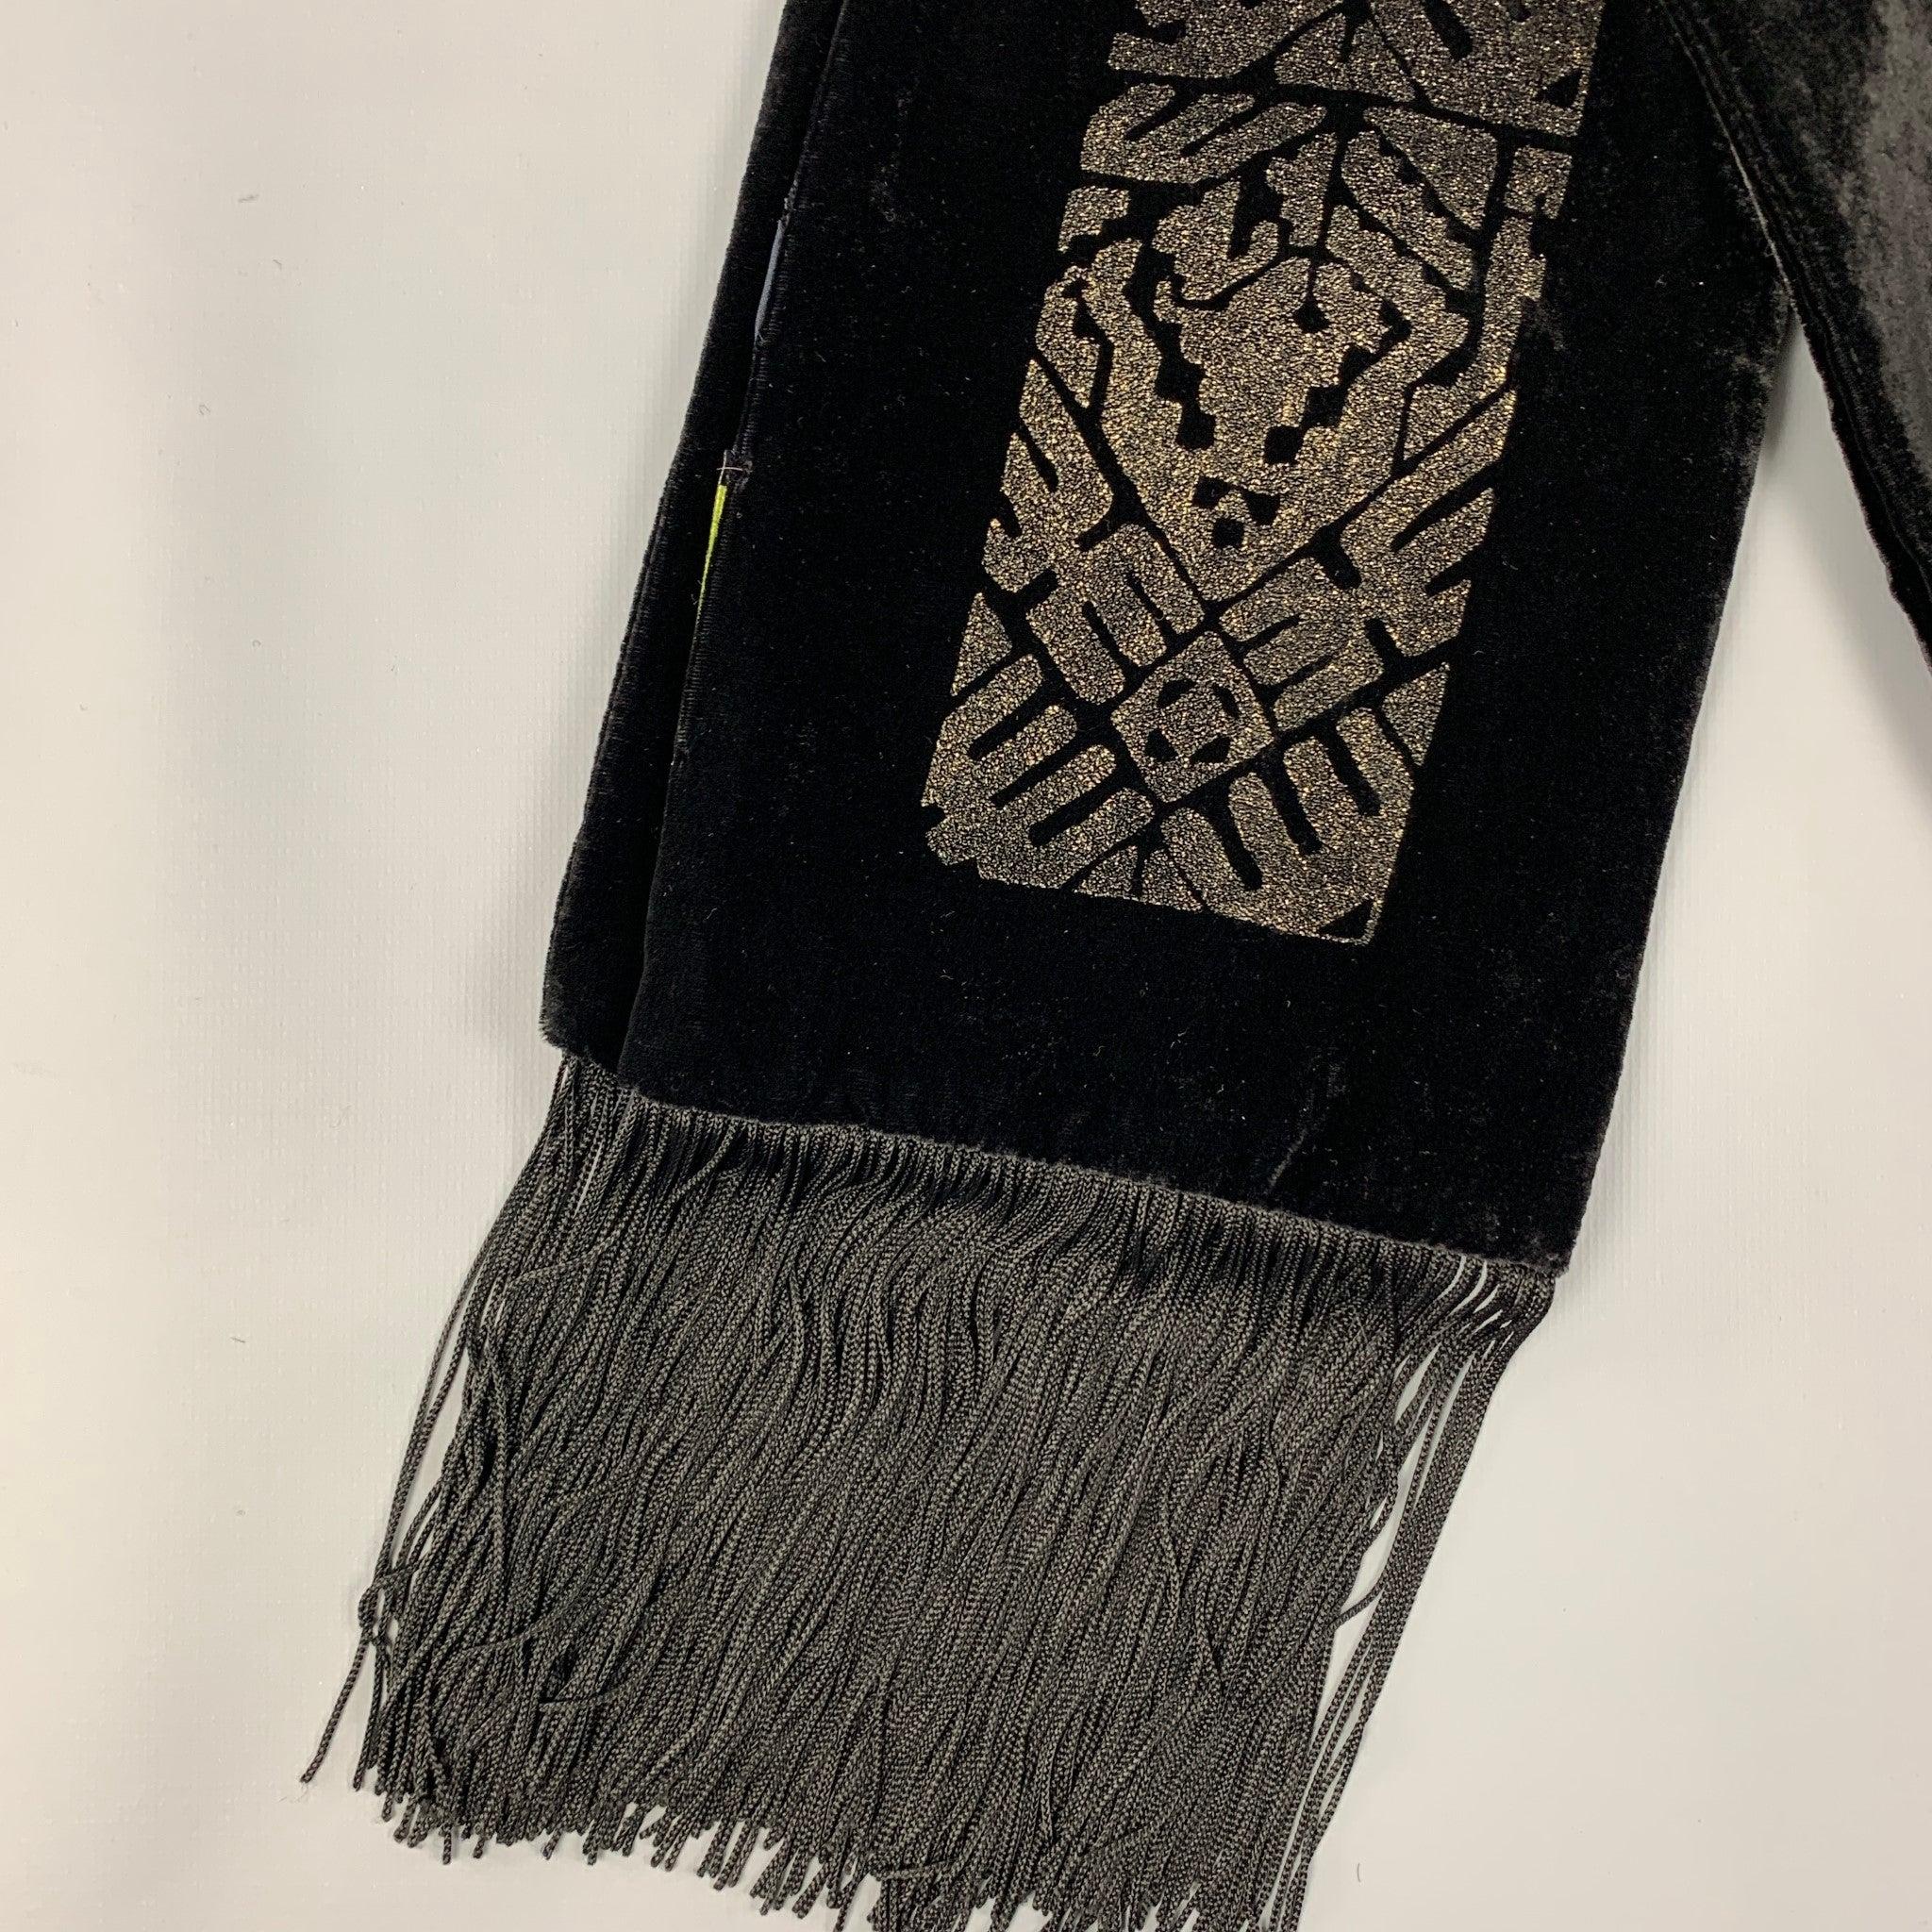 ETRO scarf comes in a black viscose / silk velvet featuring a glitter print design and a fringe trim. Made in Italy.
 Very Good Pre-Owned Condition. 
 

 Measurements: 
  
 74 inches x 6.5 inches 
  
  
  
 Sui Generis Reference: 120708
 Category: